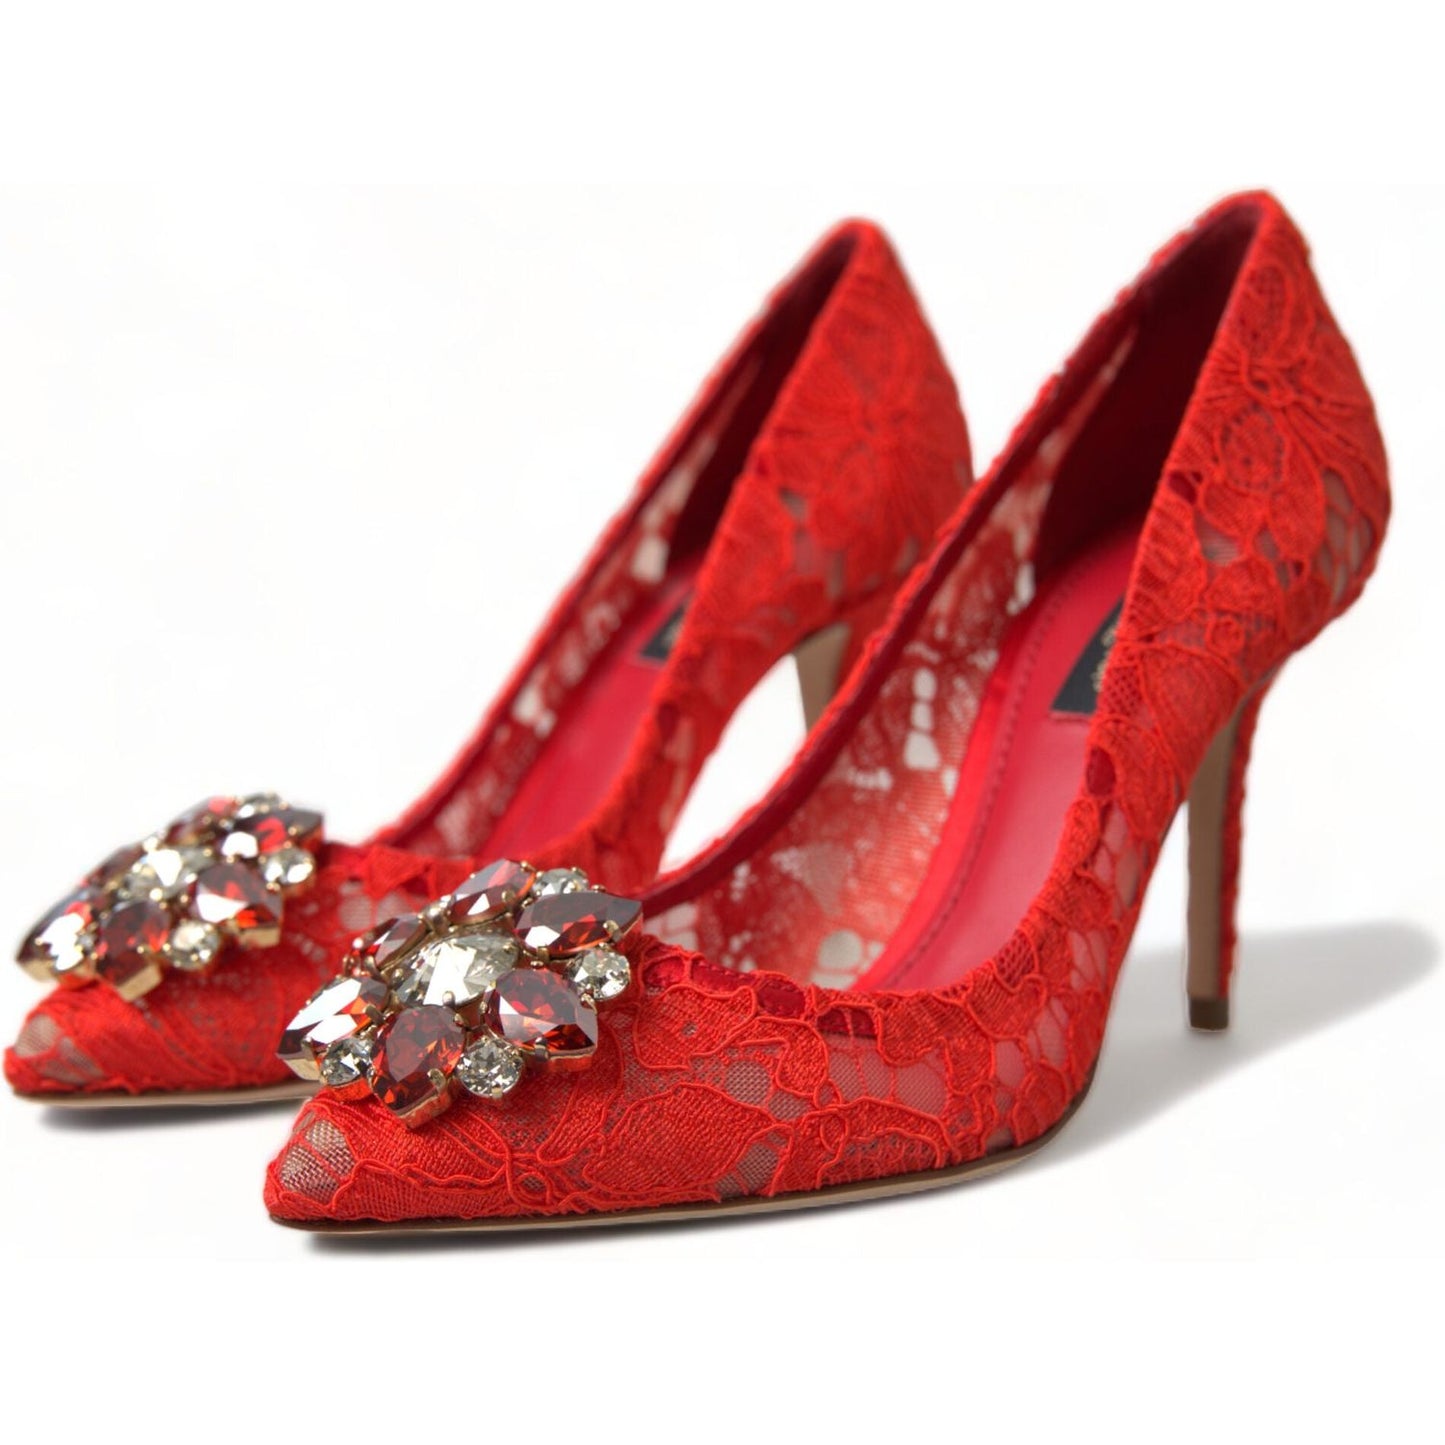 Dolce & Gabbana Exquisite Crystal-Embellished Red Lace Heels red-taormina-lace-crystal-heels-pumps-shoes-1 465A9193-bg-scaled-15d531d0-4d6.jpg